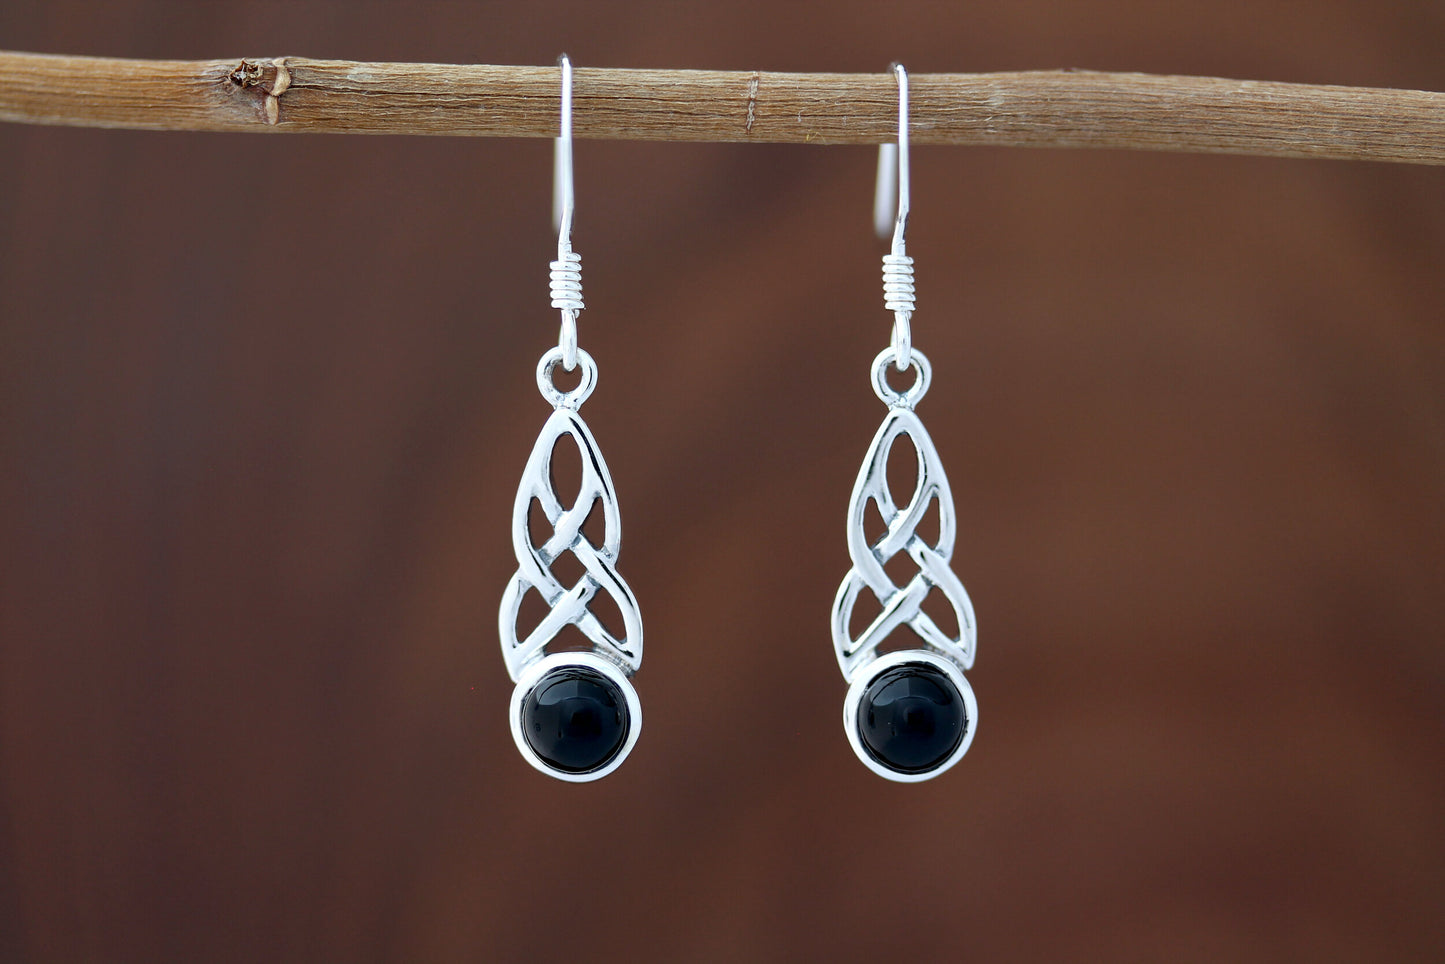 Celtic Knot Earrings - Mother-Daughter Knot with Black Onyx